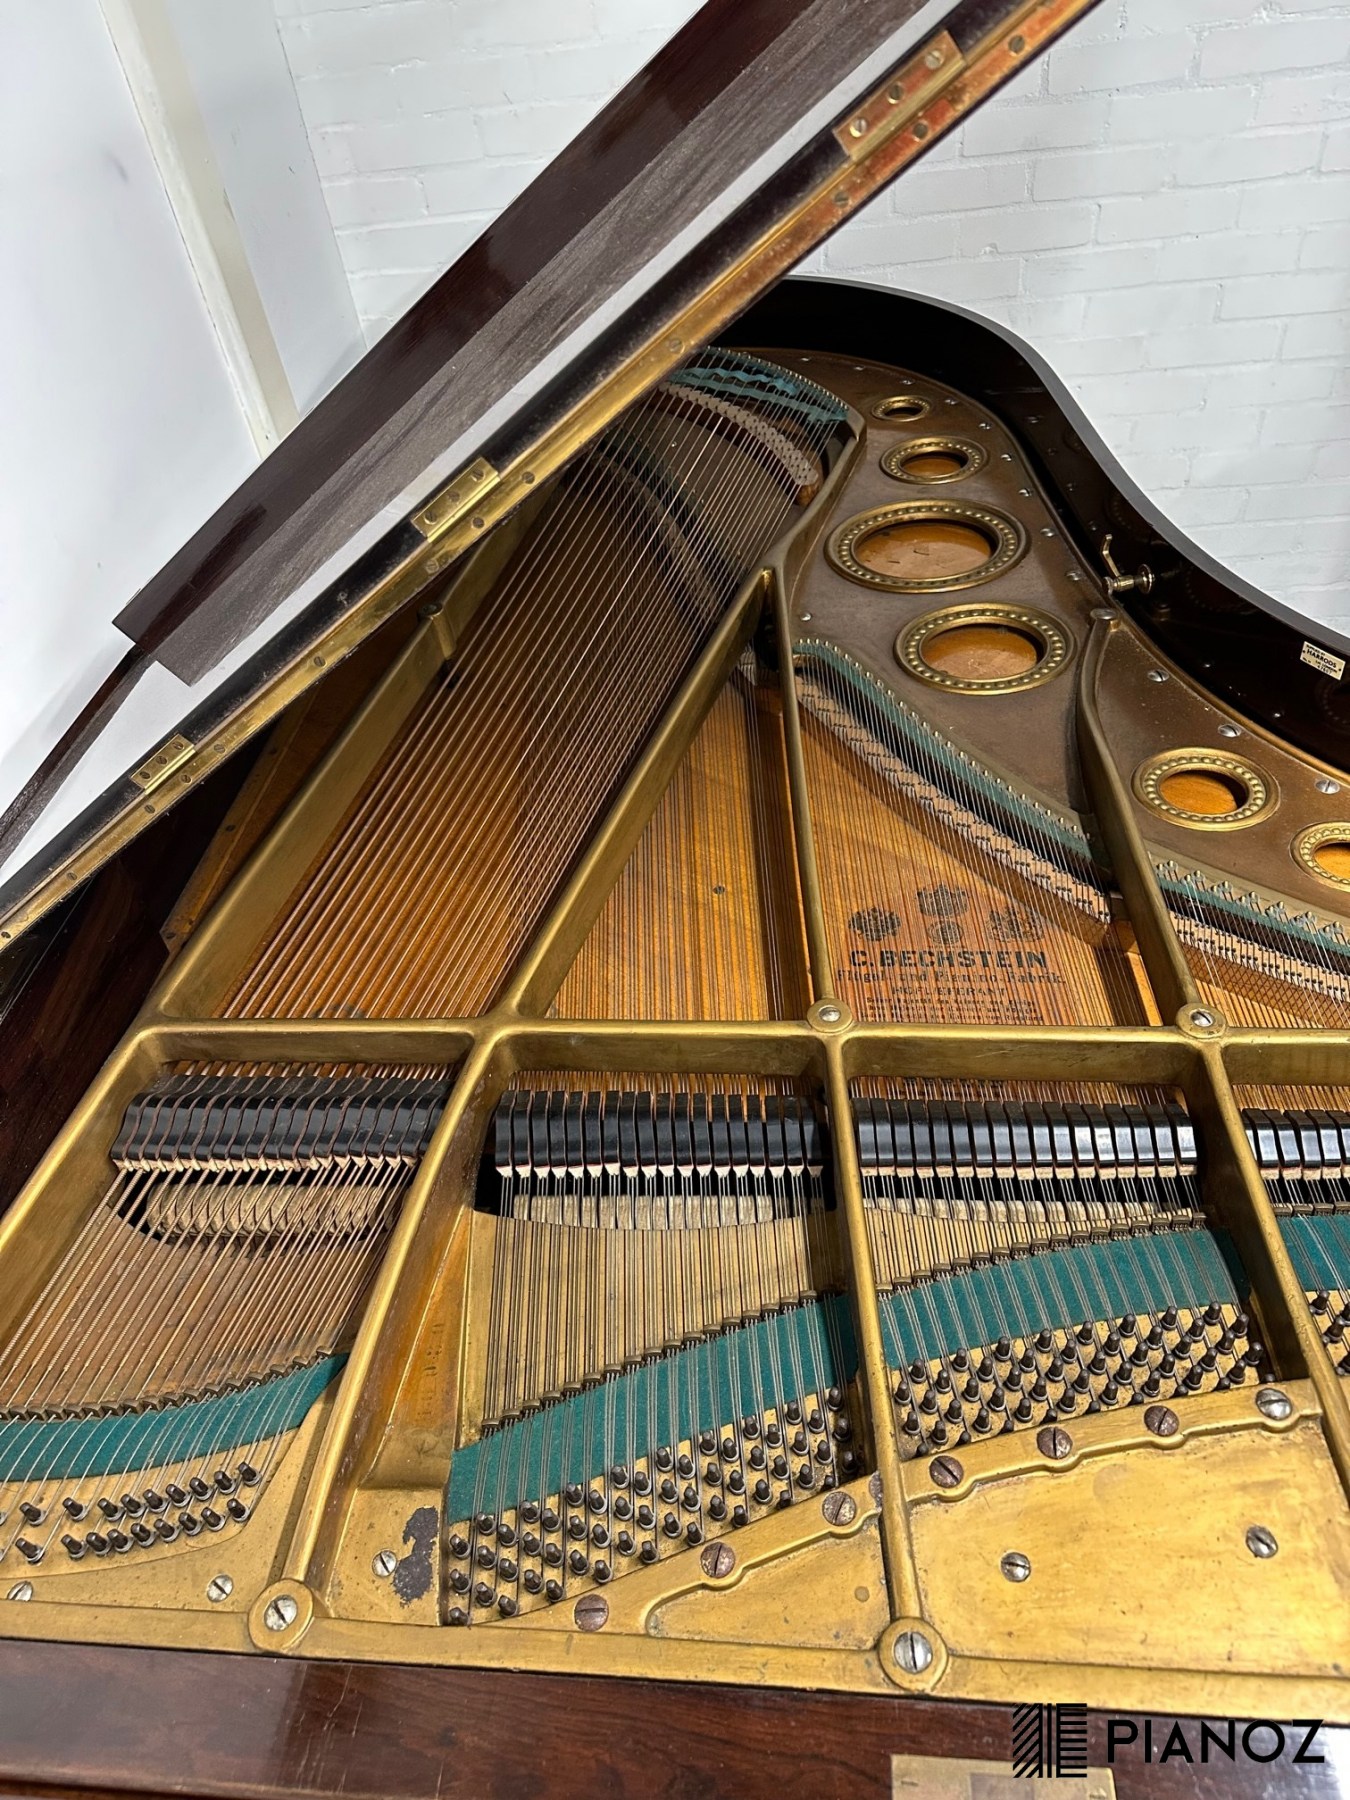 Bechstein Model D Concert Grand piano for sale in UK